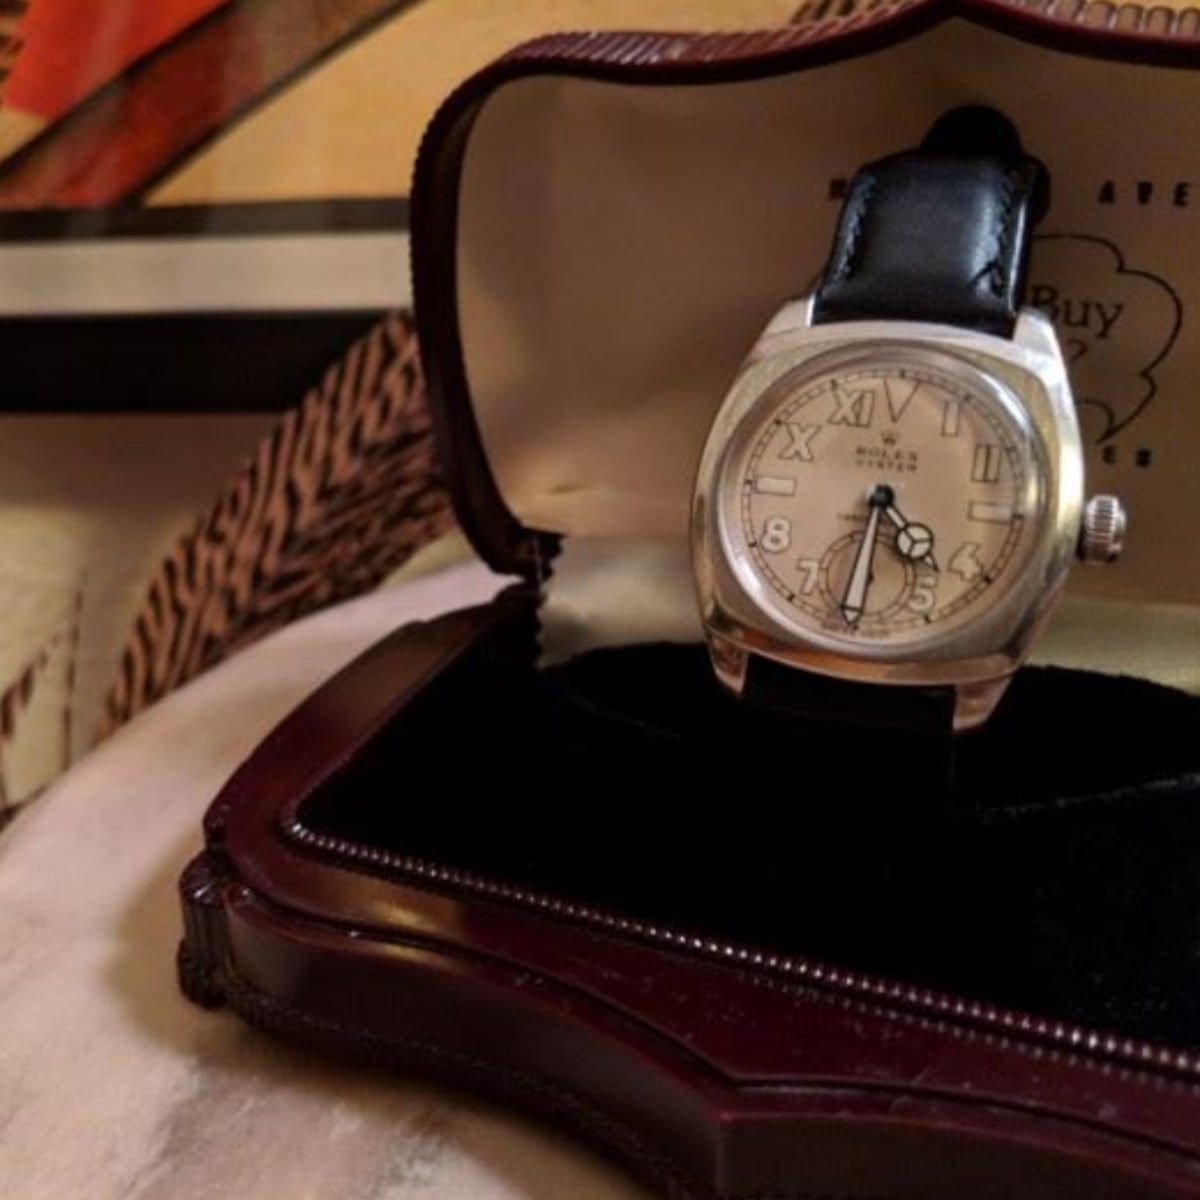 Rolex watch in a case sitting on a table